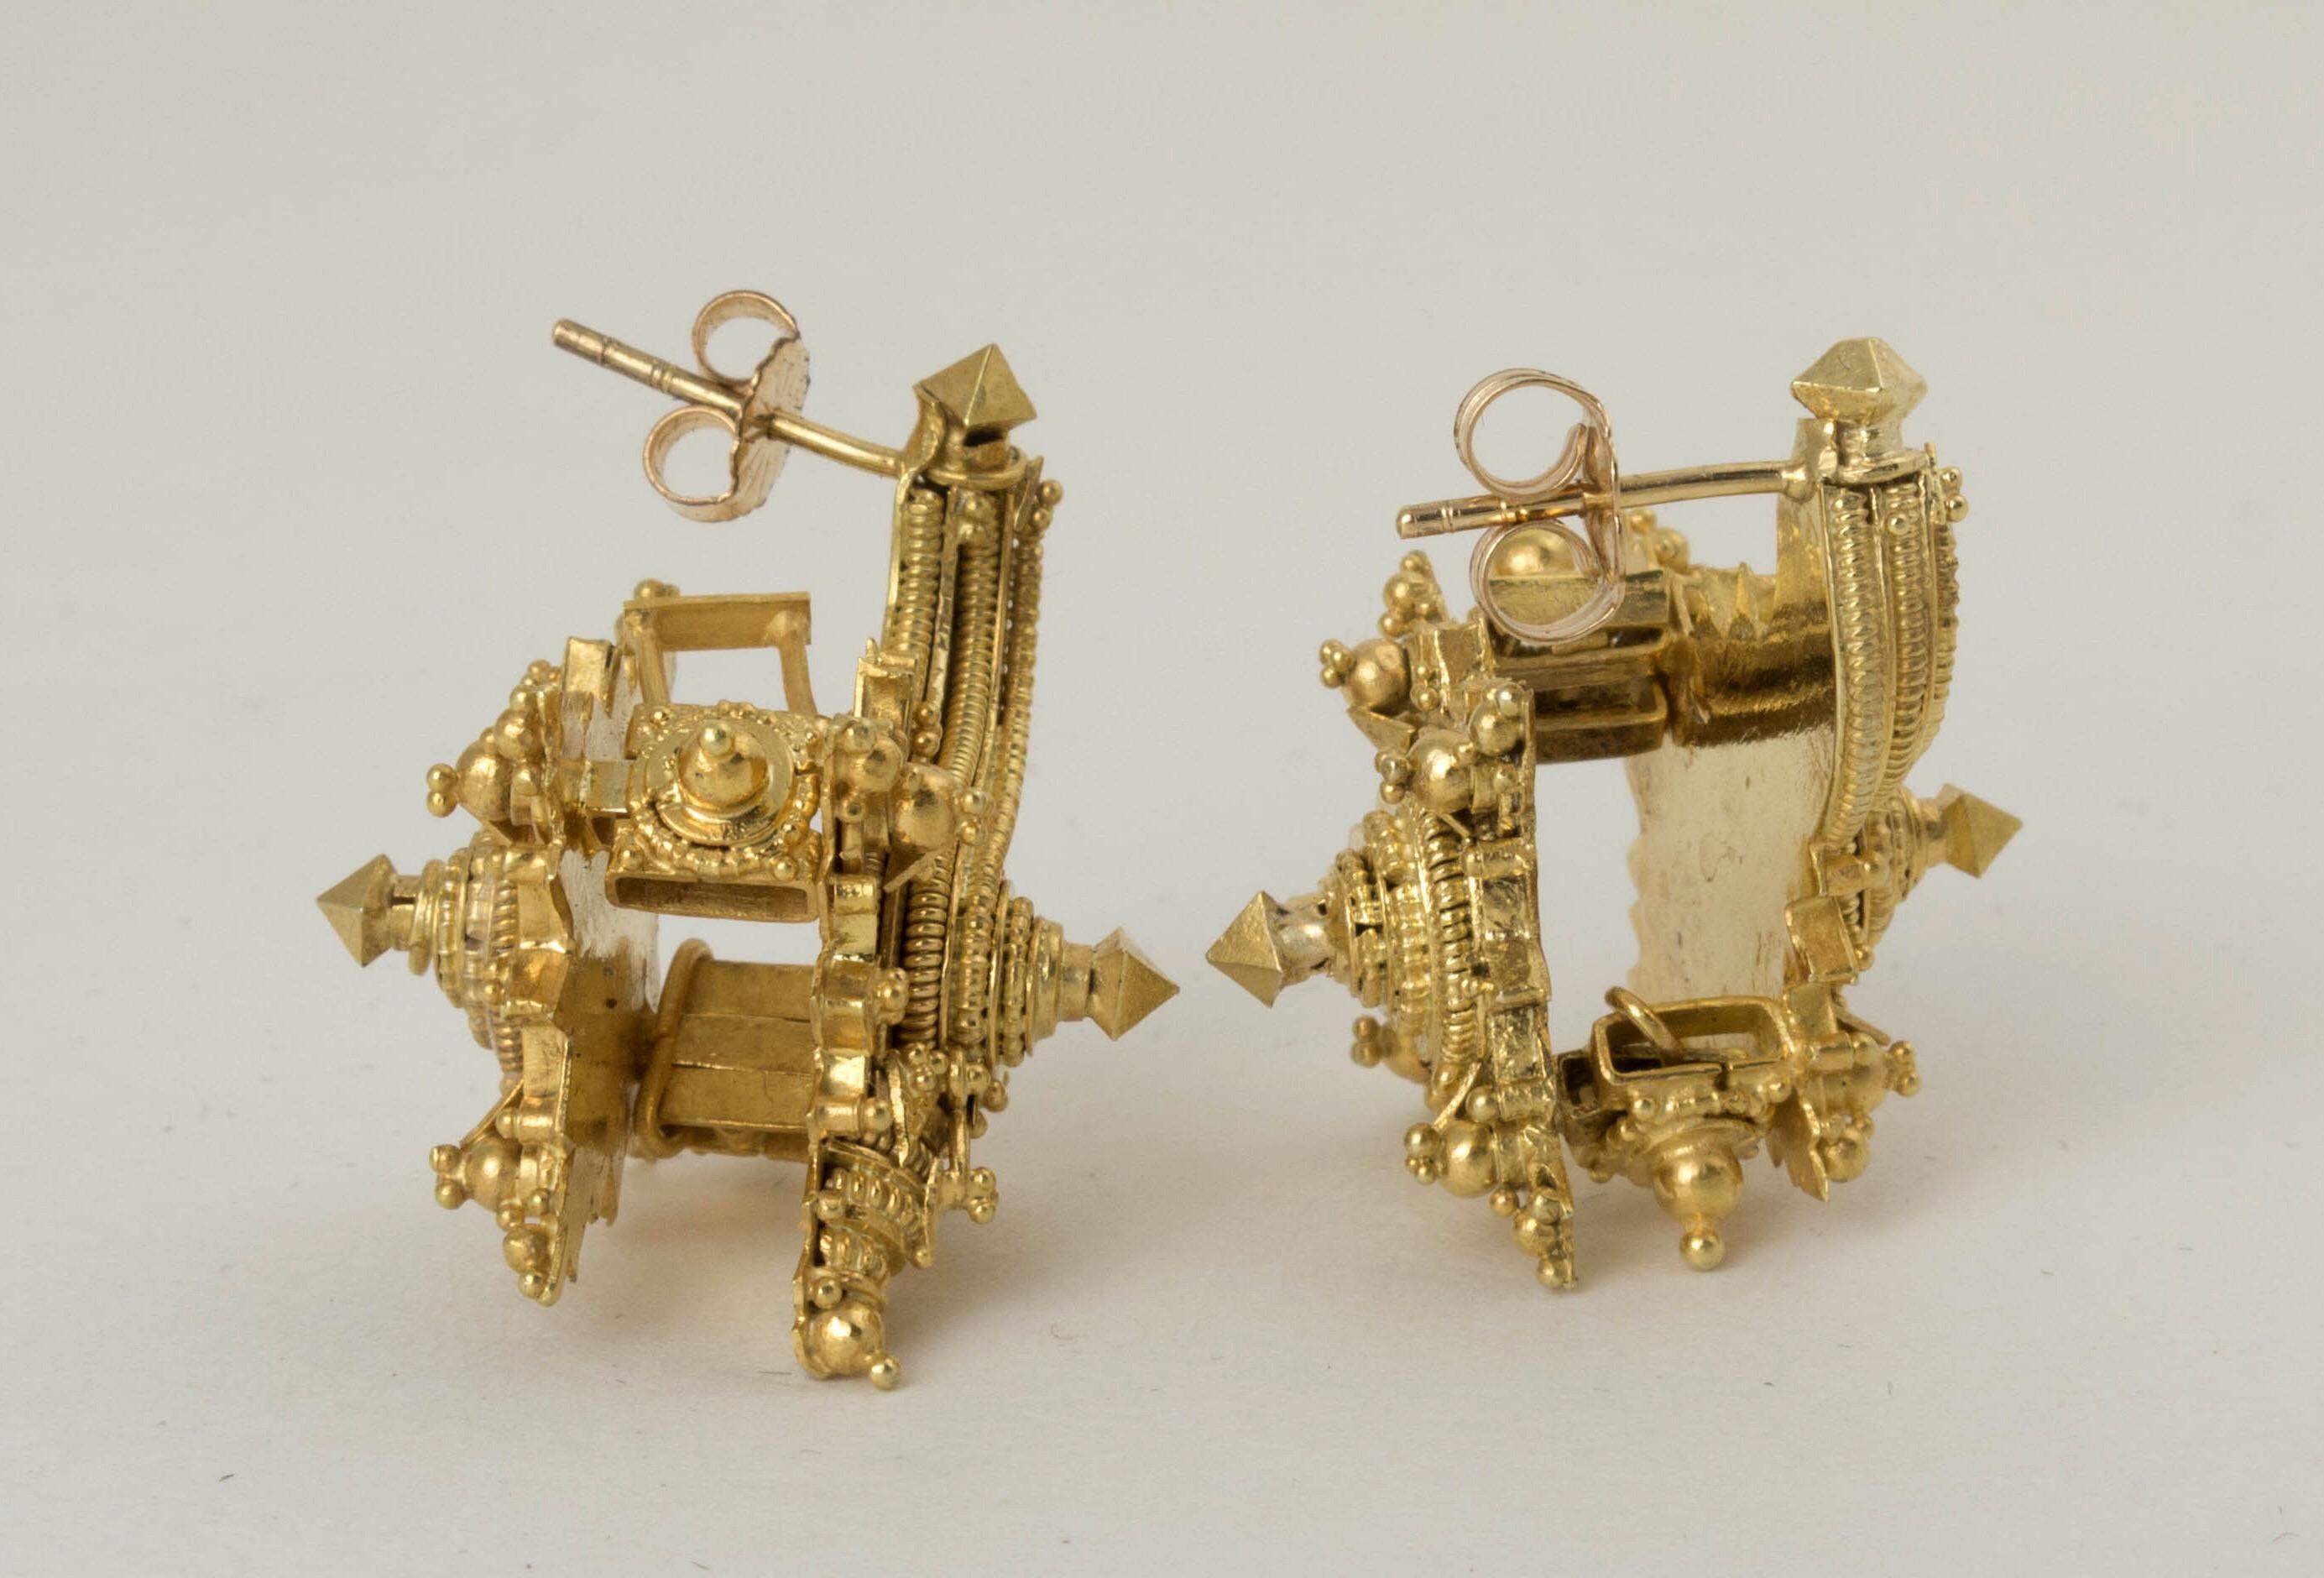 Antique Javanese 22k Gold Conch Shaped Earrings, 10th-15th Century, Indonesia For Sale 3